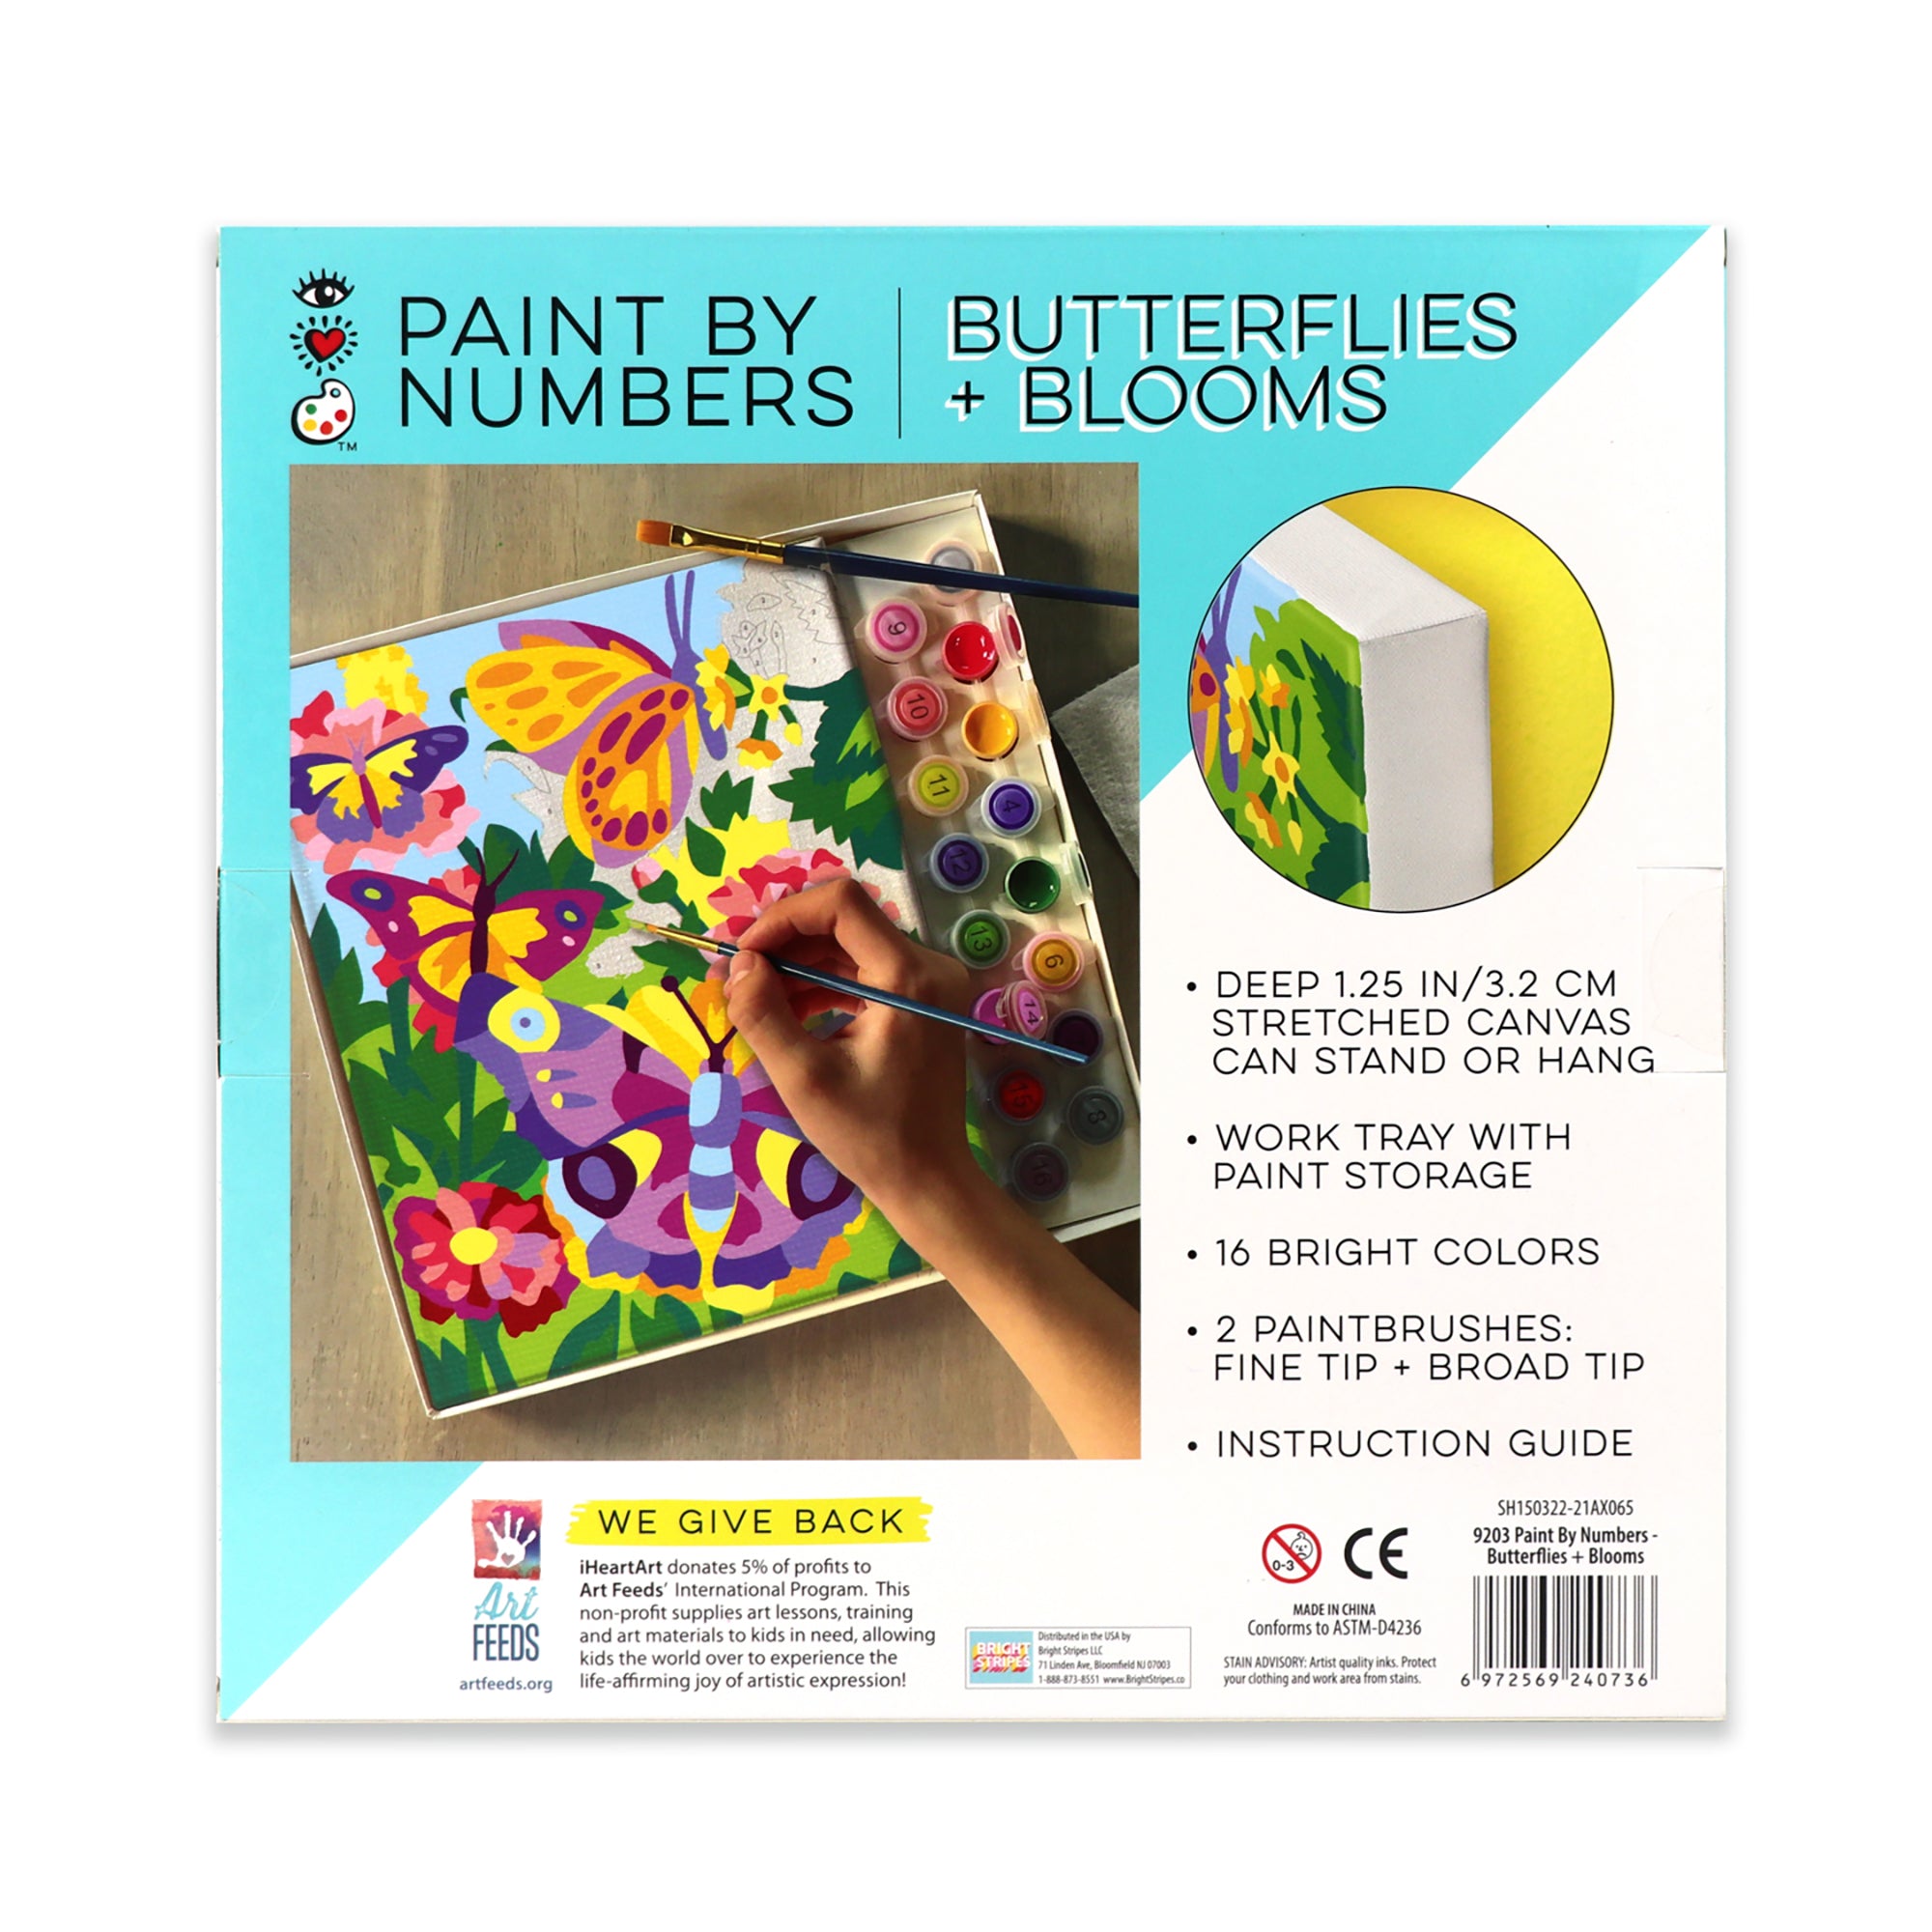 Paint by Numbers - Butterflies + Blooms